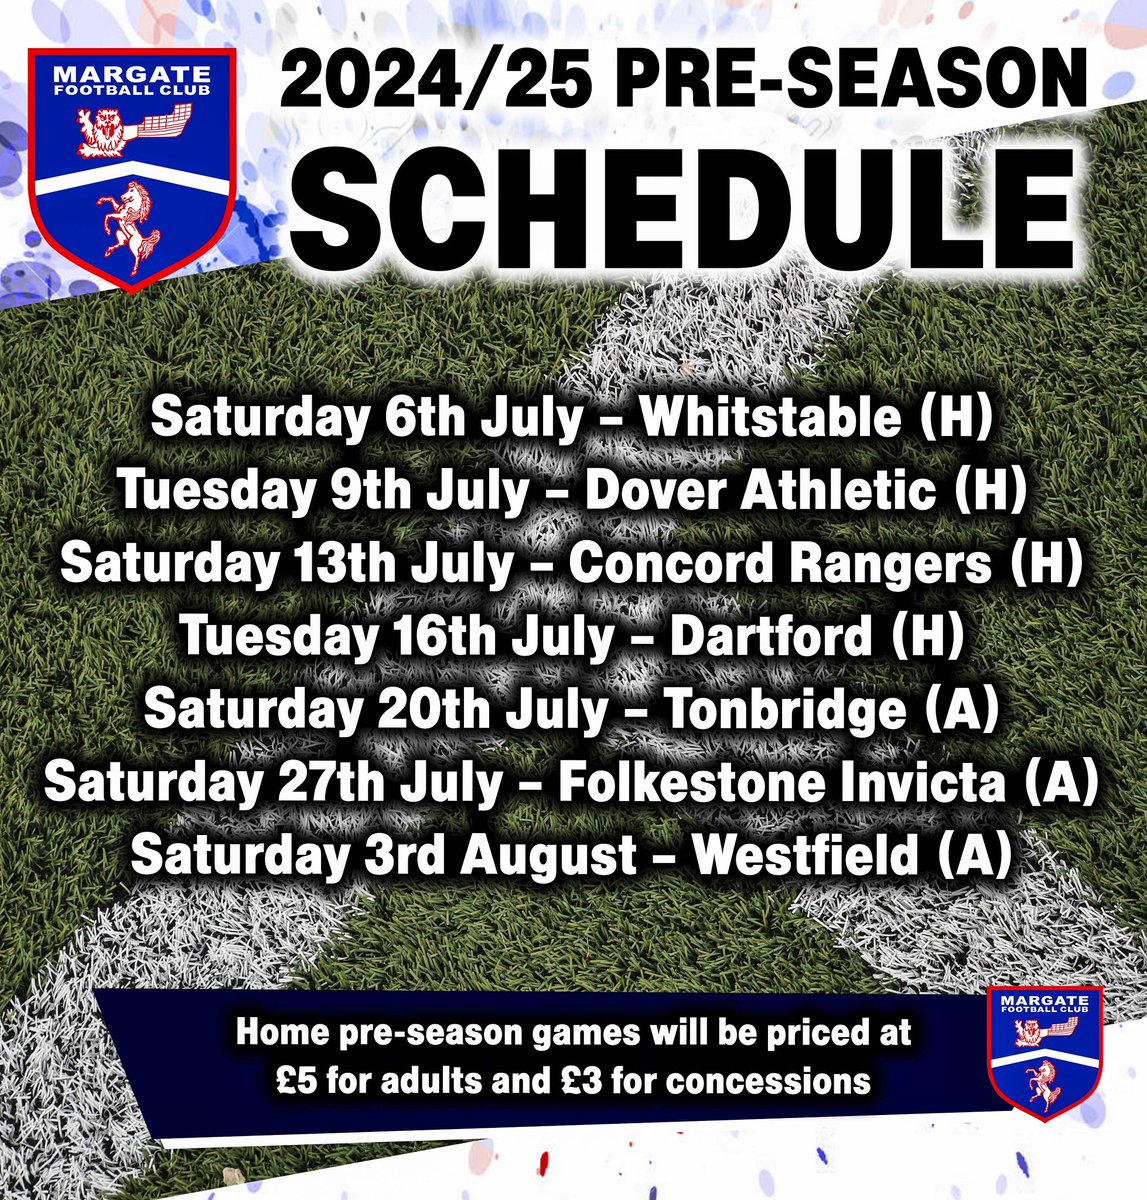 PSF SCHEDULE 🗓️ Here is how our 2024/25 pre-season looks so far… 👀 Read the full article below 👇 margate-fc.co.uk/news/17-may-20… #UpTheGate